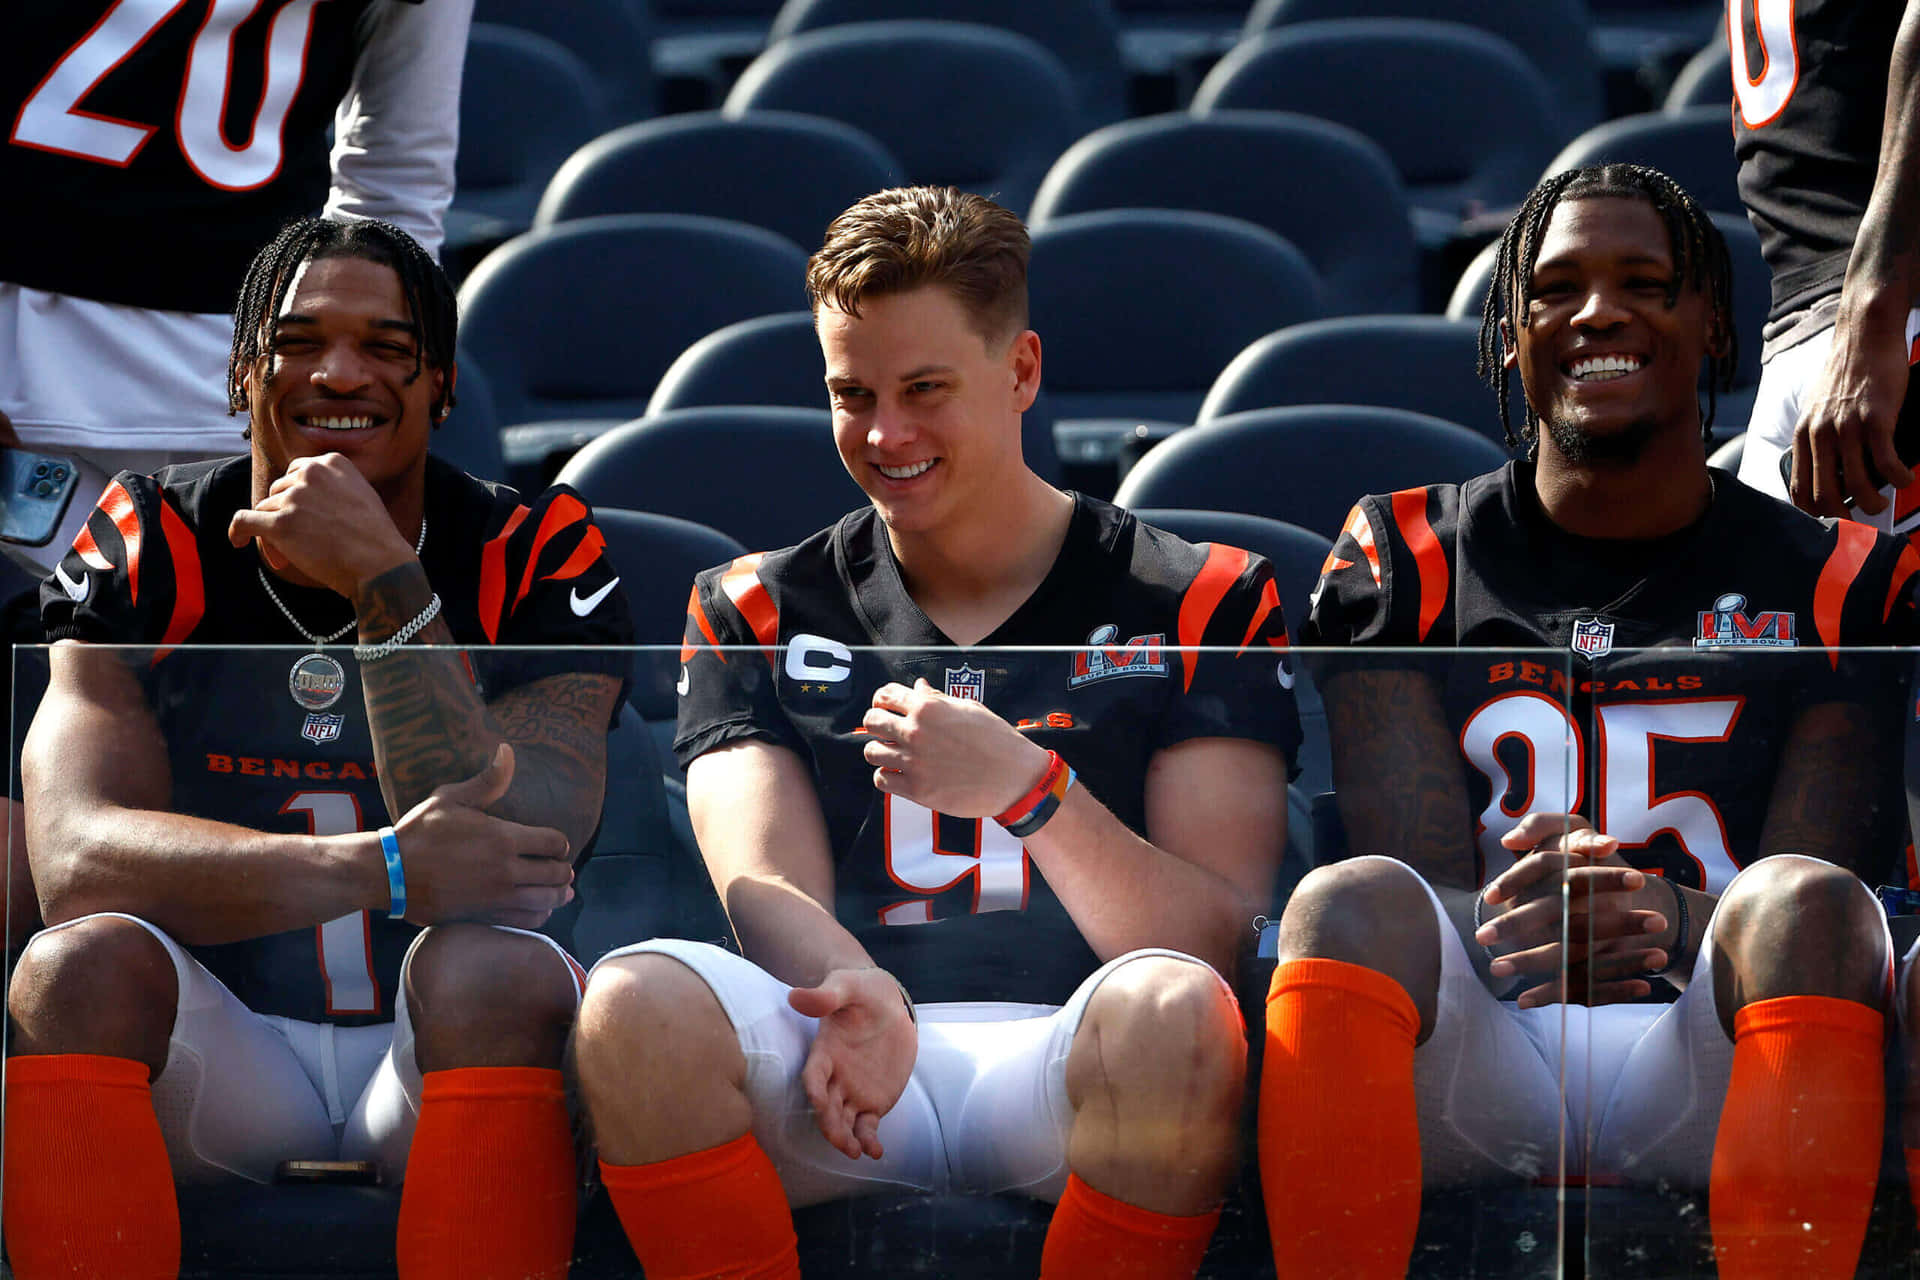 Bengals Players Sideline Smiles Wallpaper